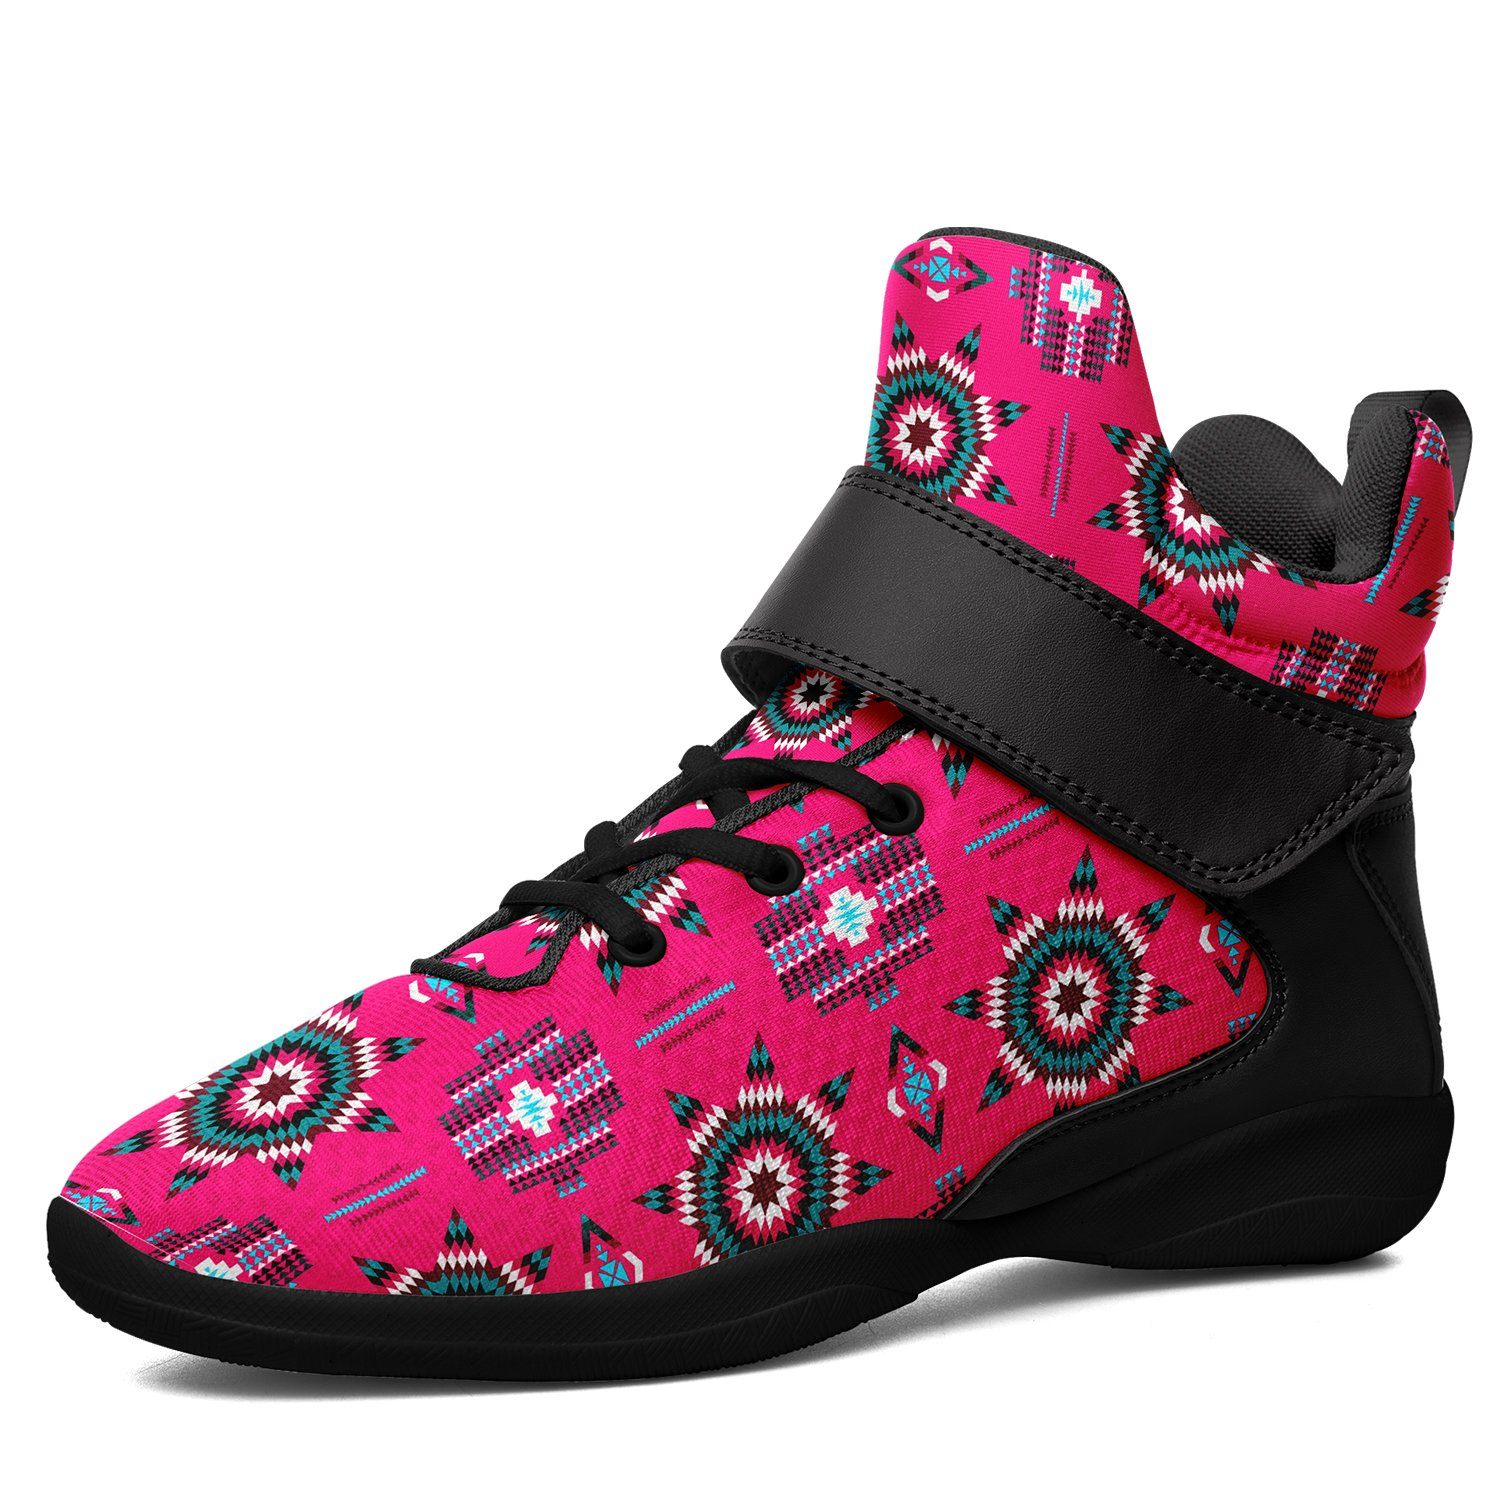 Rising Star Strawberry Moon Ipottaa Basketball / Sport High Top Shoes 49 Dzine US Women 4.5 / US Youth 3.5 / EUR 35 Black Sole with Black Strap 